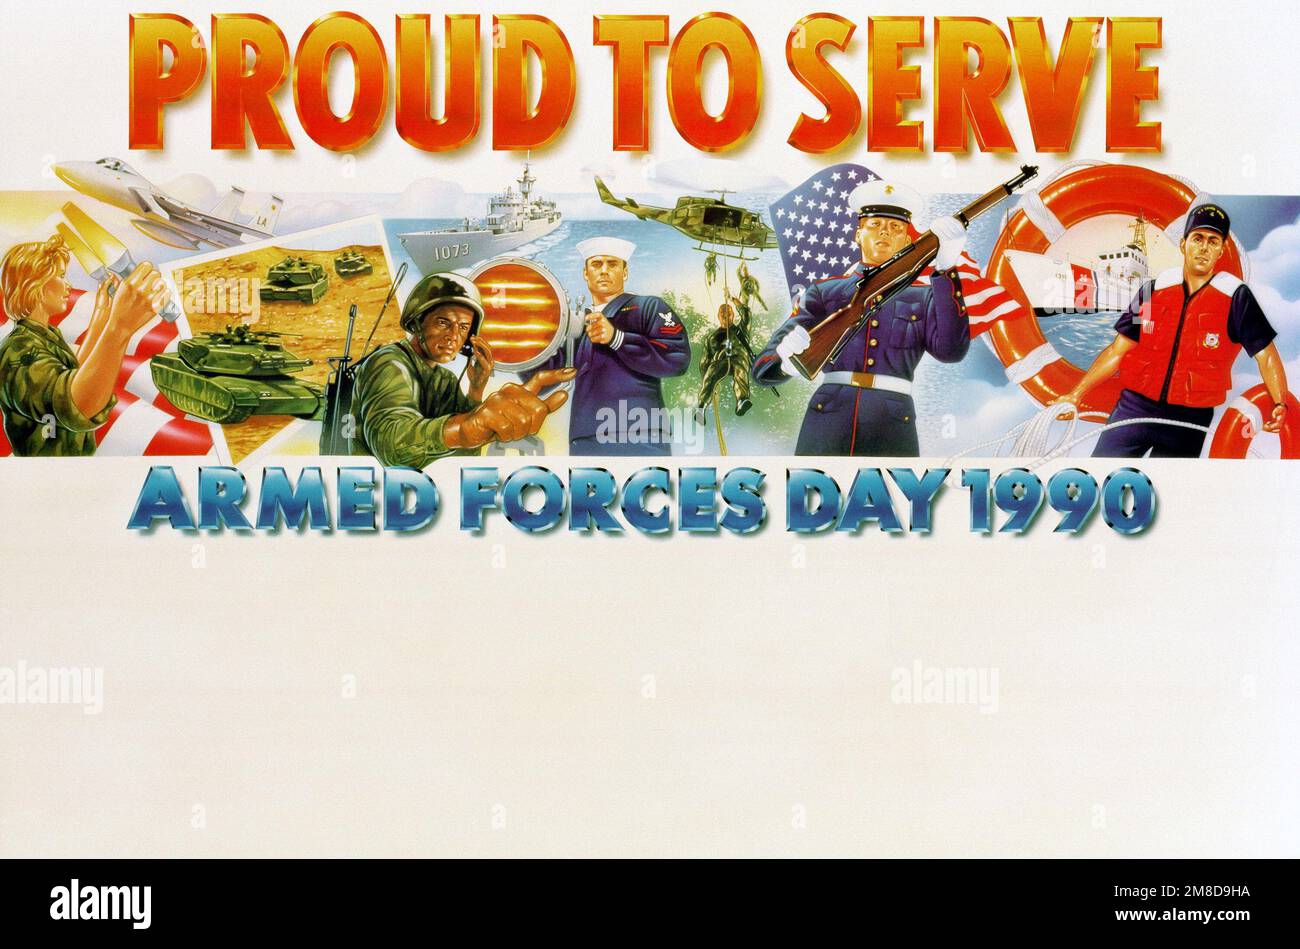 PROUD TO SERVE. ARMED FORCES DAY 1990. In honor of the 40th Anniversary when President Harry S. Truman led the effort to establish a single holiday for citizens to come together and thank our military members for their patriotic service in support of our country. On August 31, 1949, Secretary of Defense Louis Johnson announced the creation of an Armed Forces Day to replace separate Army, Navy and Air Force Days. The single-day celebration was a result of the unification of the Armed Forces under one department -- the Department of Defense. Armed Forces Day is celebrated annually on the third S Stock Photo